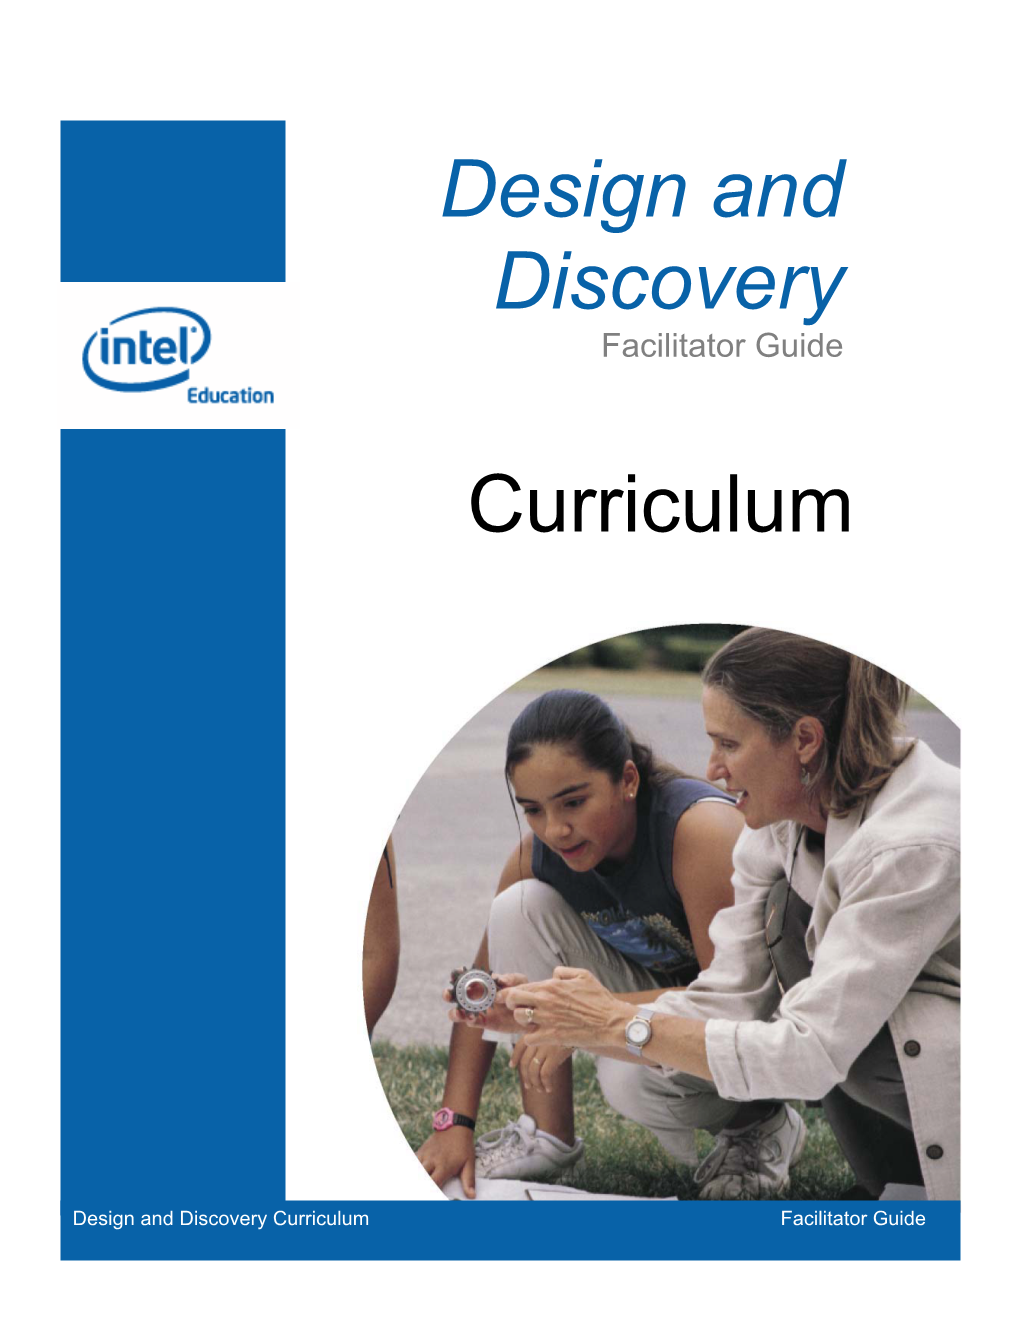 Design and Discovery Curriculum Facilitator Guide Table of Contents